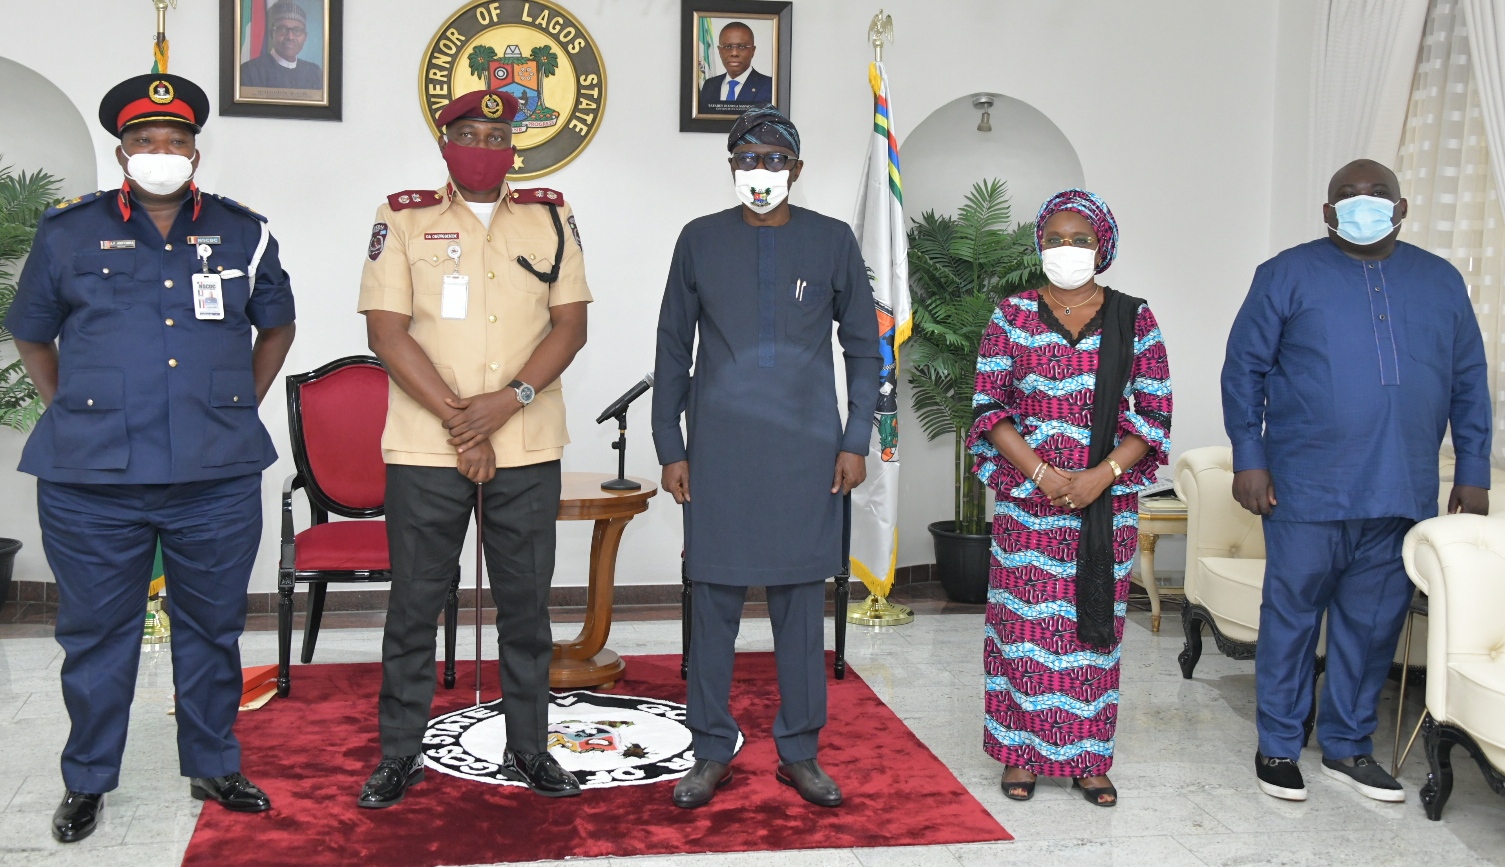 L-R: State Commandant, Nigeria Security and Civil Defence Corps (NSCDC), Mr. Adeyinka Fasiu Ayinla; Sector Commander, Federal Road Safety Corps (FRSC) in charge of Lagos, Mr. Olusegun Ogungbemide; Lagos State Governor, Mr. Babajide Sanwo-Olu; Secretary to the State Government, Mrs. Folasade Jaji and Special Senior Assistant on Security to the Governor, Mr. Bayo Ogunlana, during a courtesy call on the Governor by the FRSC and NSCDC Commandants, at Lagos House, Marina, on Thursday, July 23, 2020.